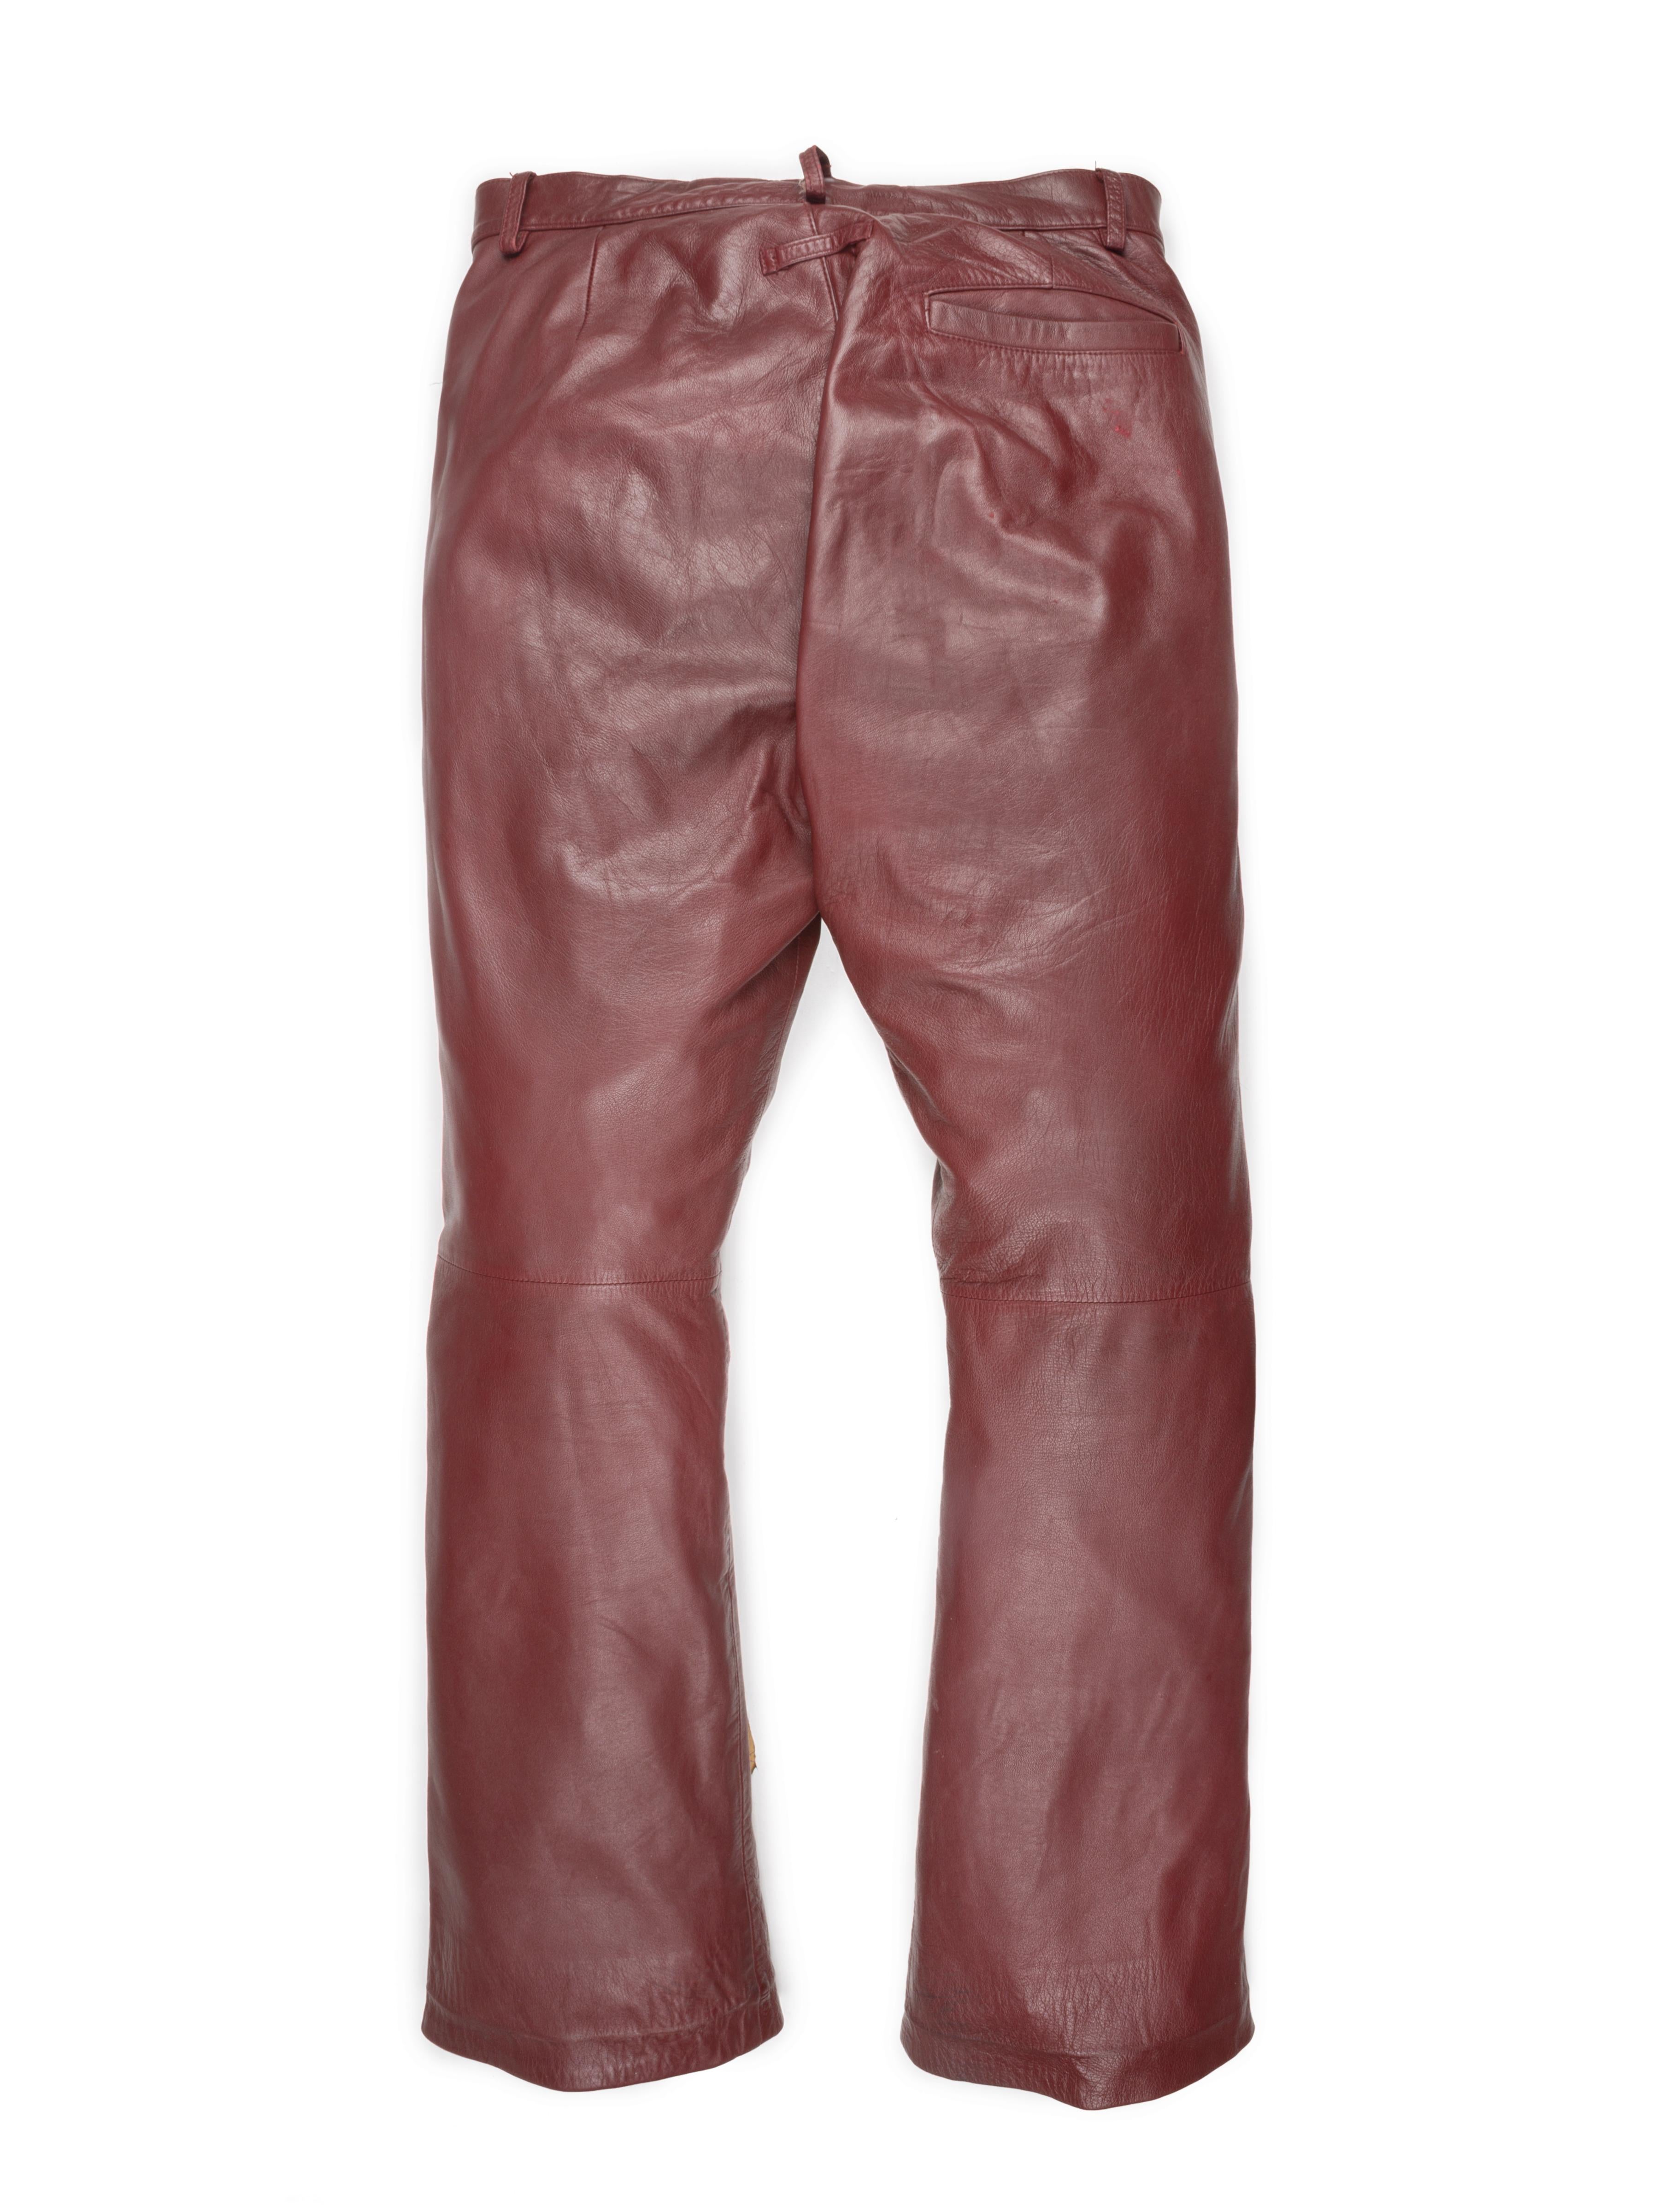 These red leather lambskin pants feature subtle moto-details, such as the snap closure at the waist and the zipper-pull pockets.

Condition: 8/10. 

Tagged size: 48

Waist: 15in

Rise: 11in

Thigh: 11in

Inseam: 29in

Hem: 8.5in